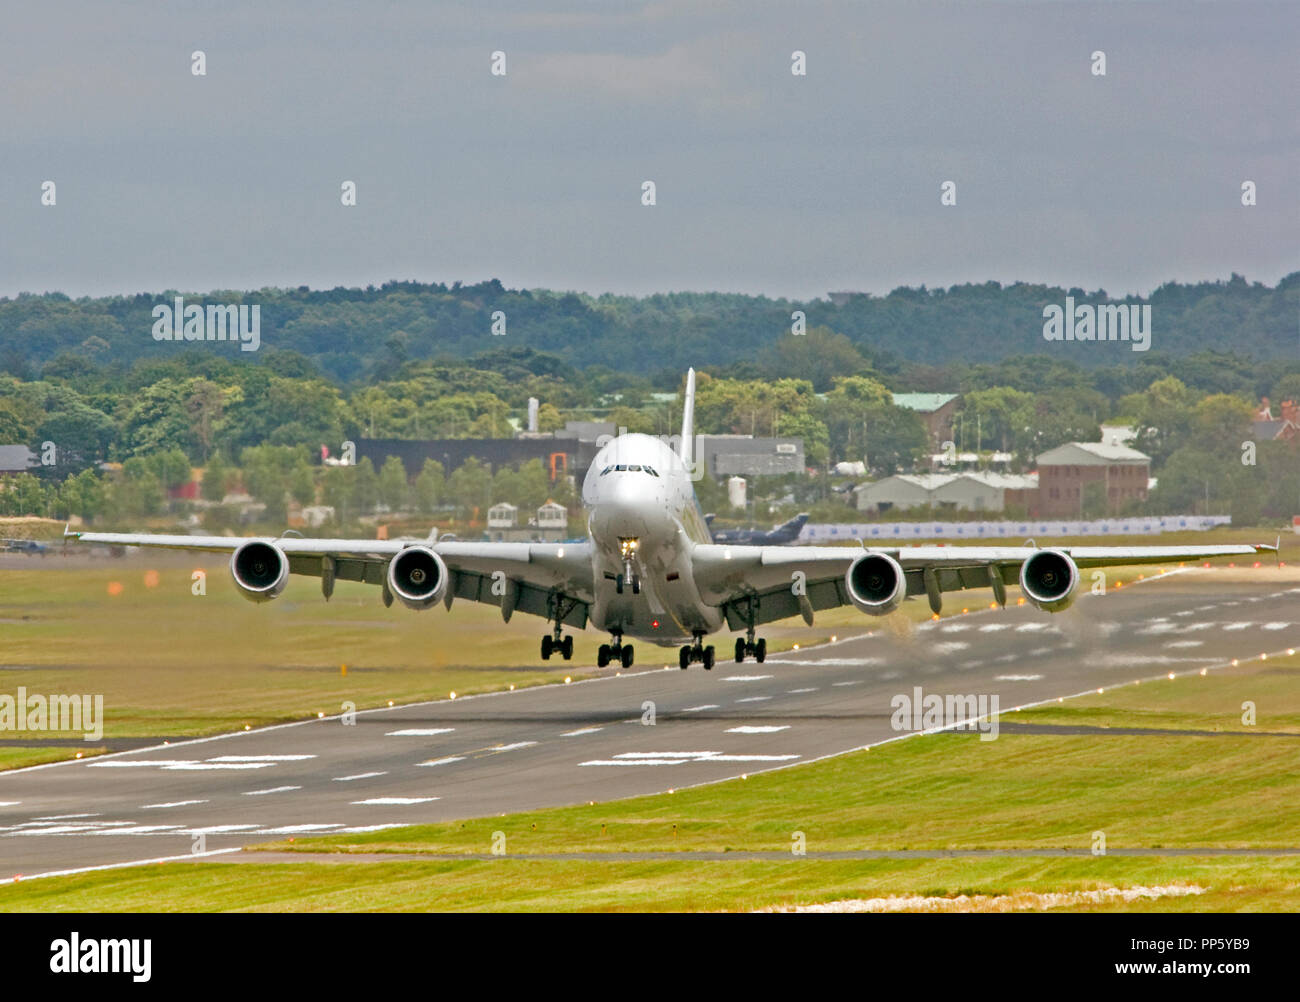 Airbus Industrie Airbus A380-841 demonstrator taking off from the runway at Farnborough. Stock Photo